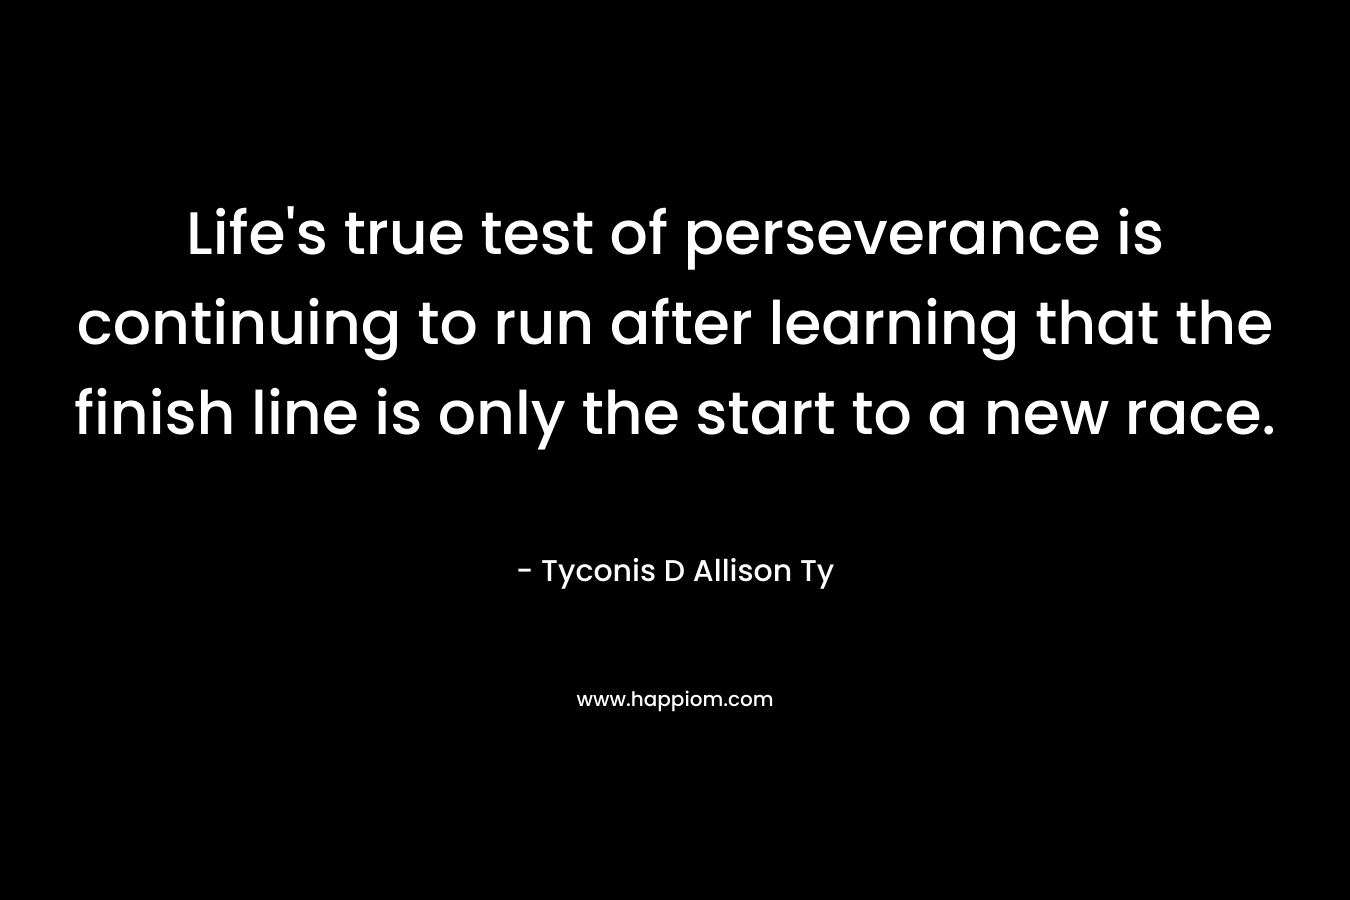 Life's true test of perseverance is continuing to run after learning that the finish line is only the start to a new race.